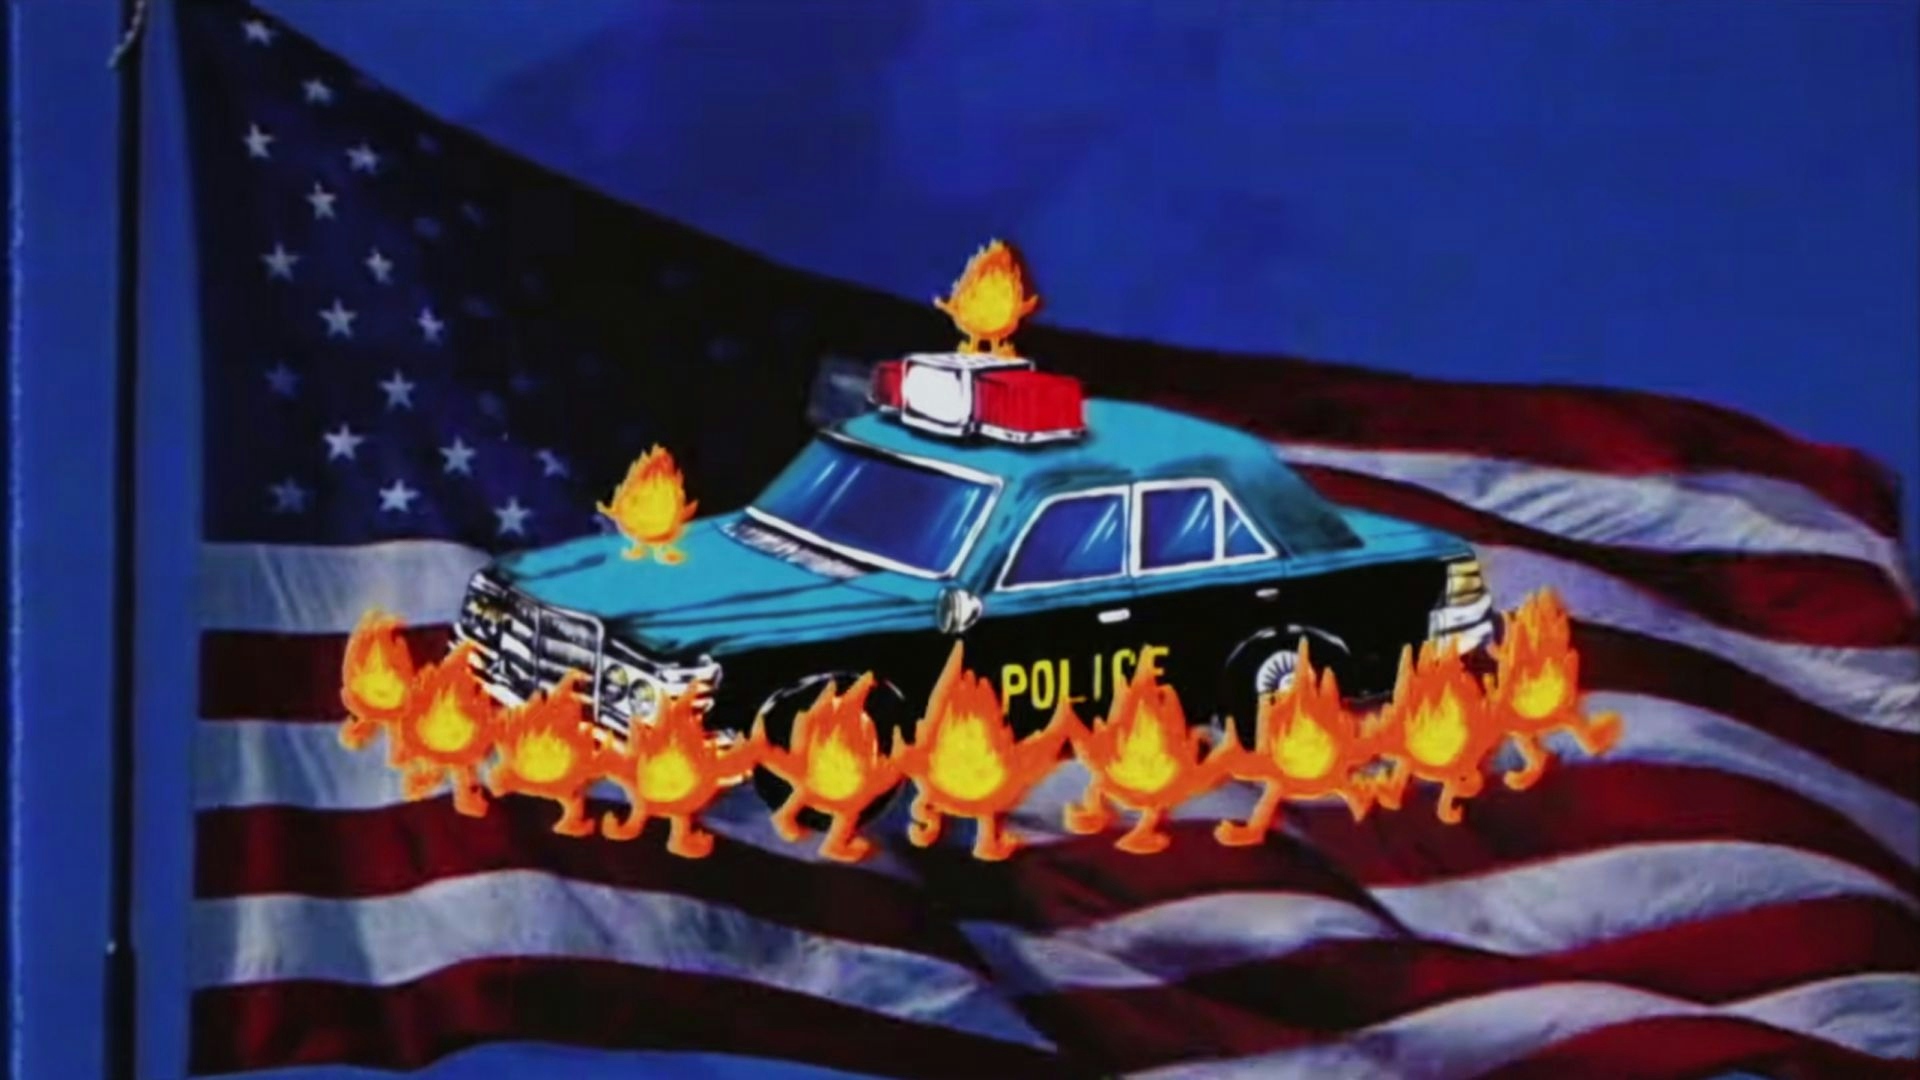 Earl Sweatshirt “Off Top” Official Music Video burning the police car